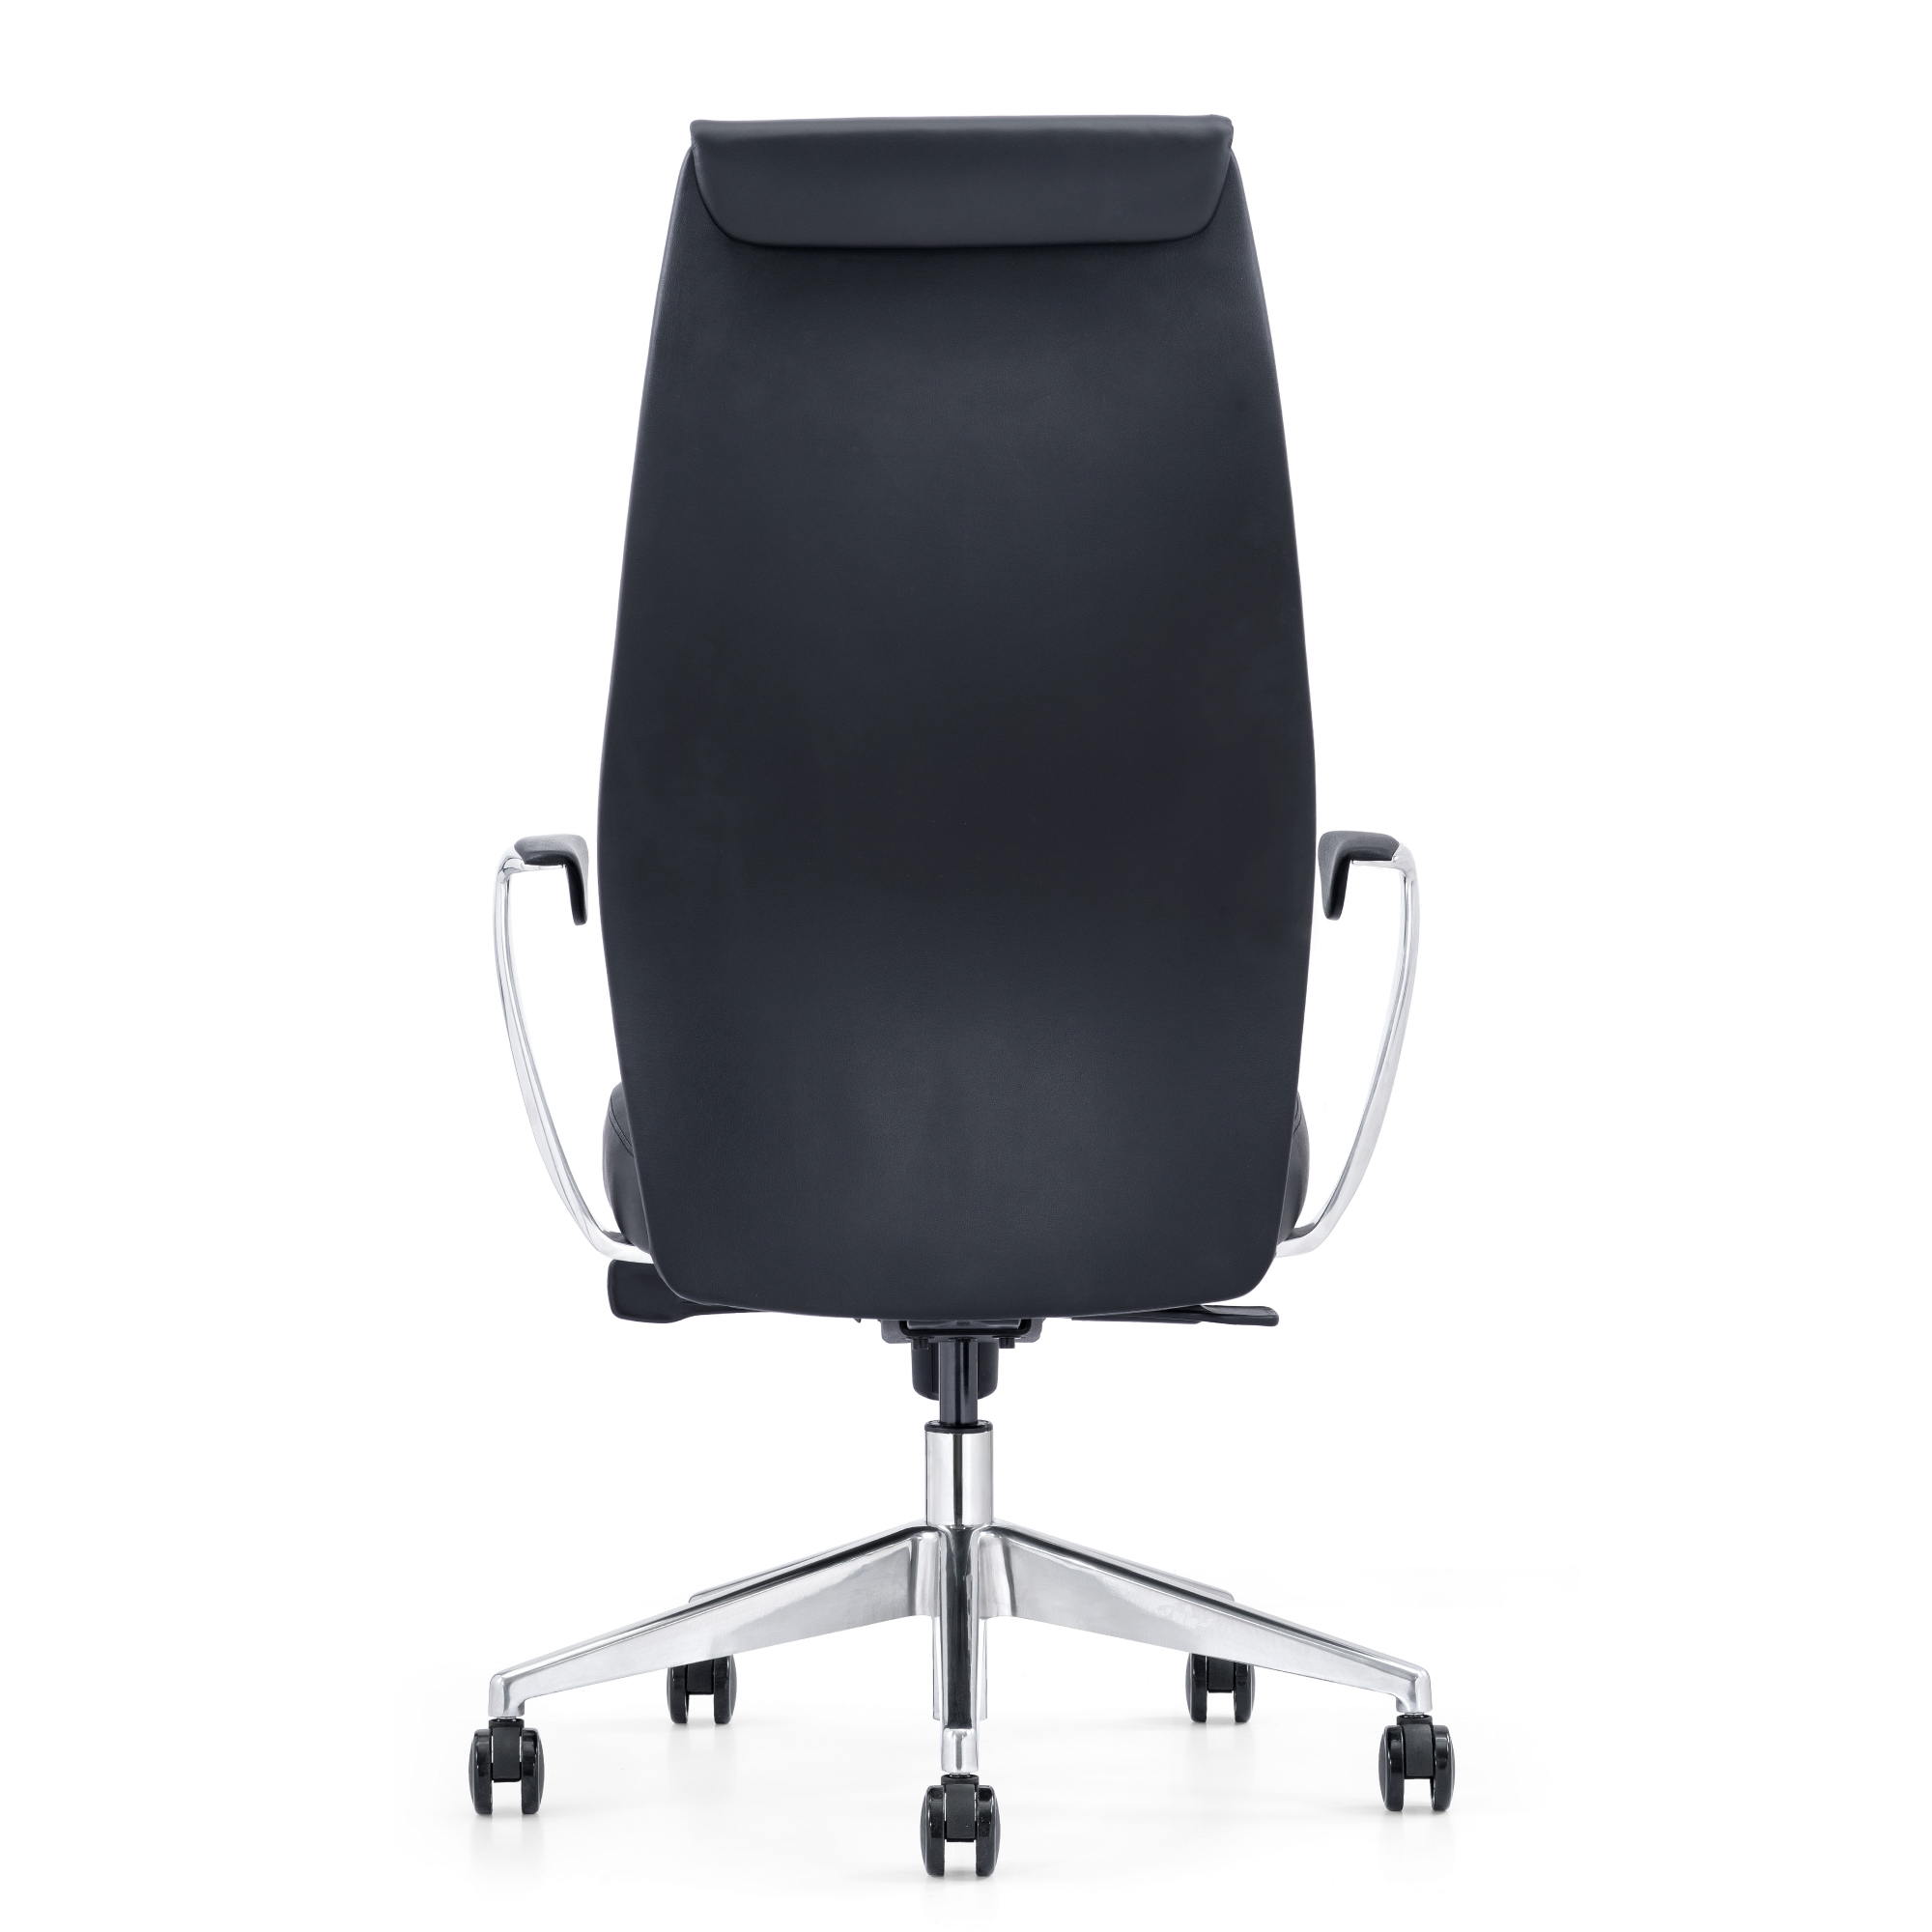 Rika Chair With Extra-Thick Seat Cushion - Buzz Seating Online